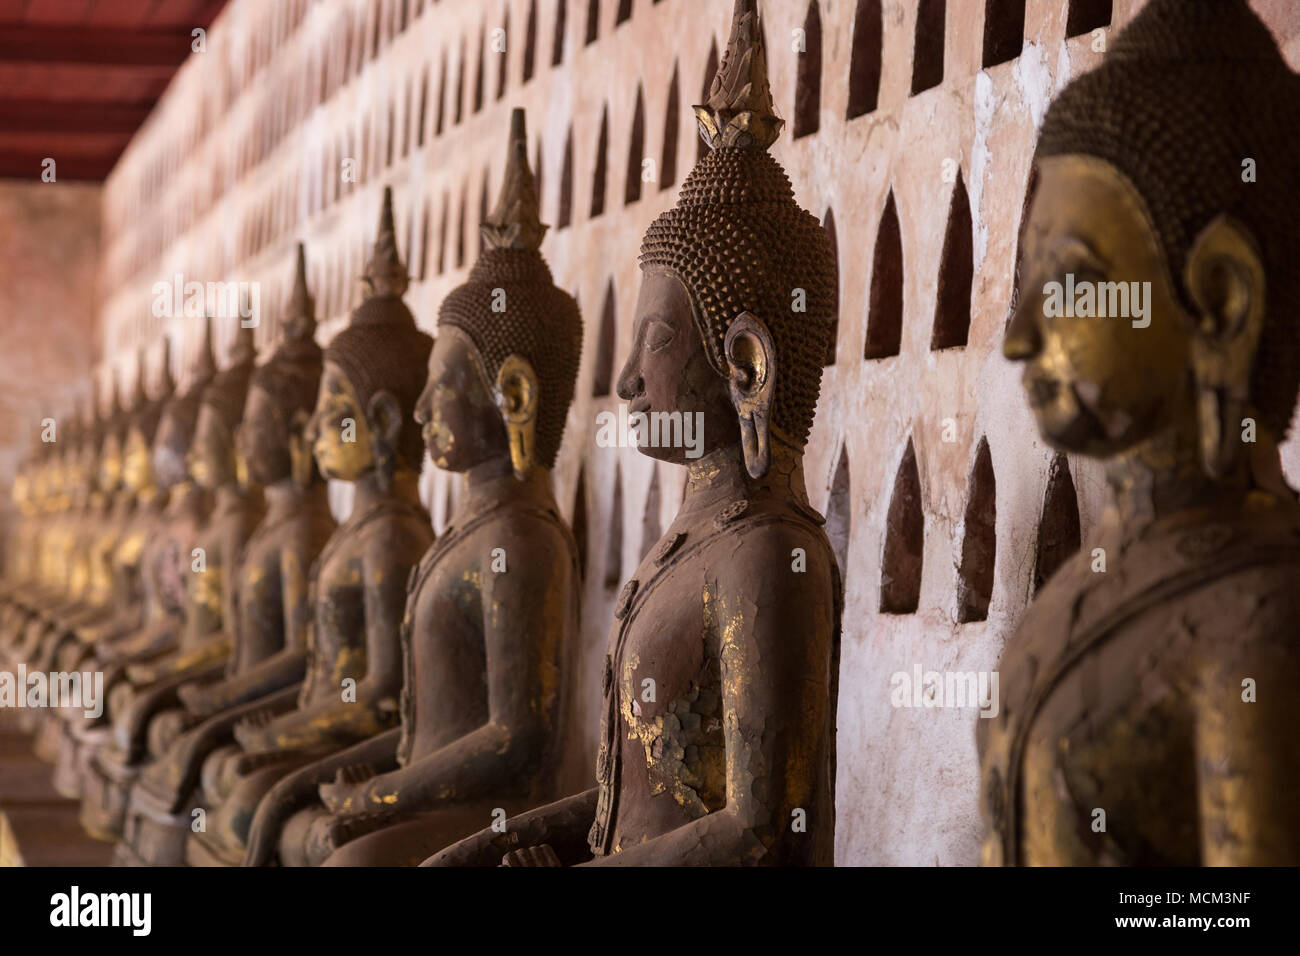 View of many old and aged Buddha statues at the Wat Si Saket (Sisaket) temple's cloister in Vientiane, Laos. Shallow depth of field. Stock Photo